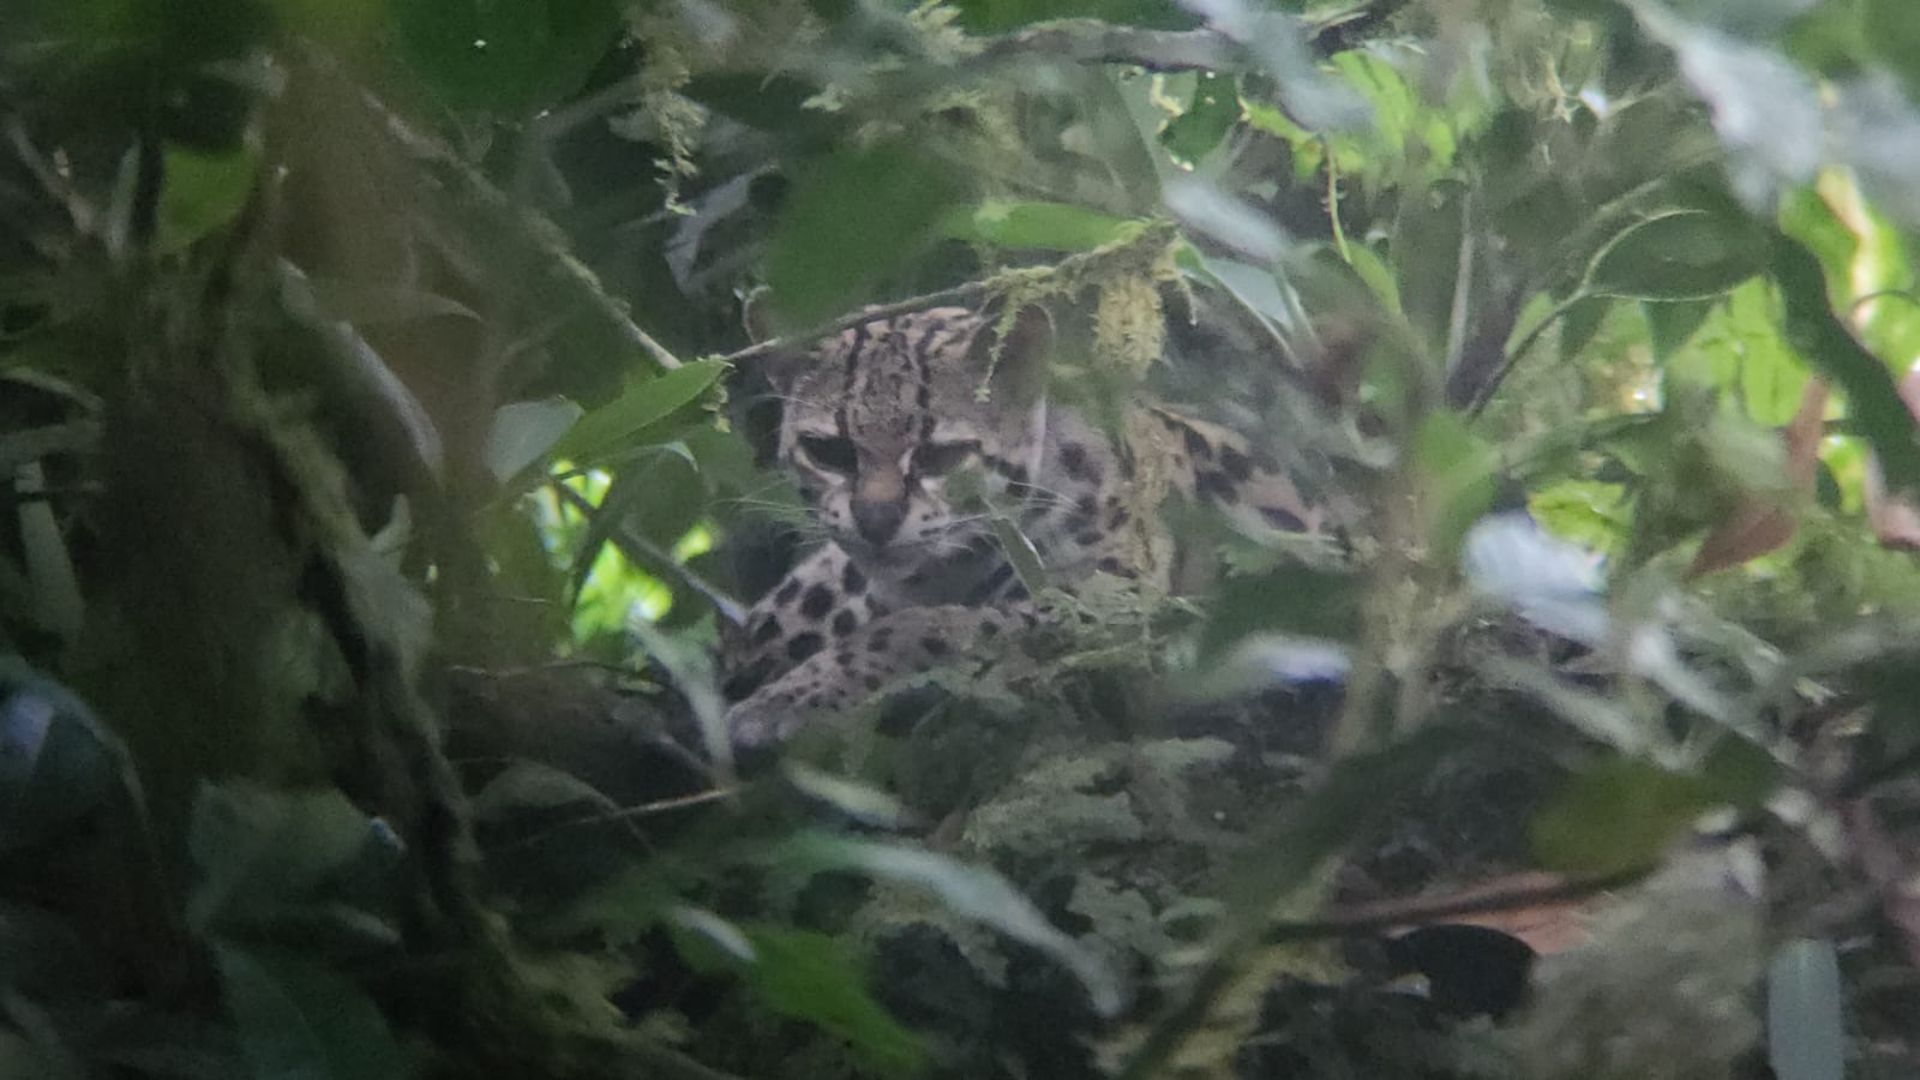 A local margay cat in a tree